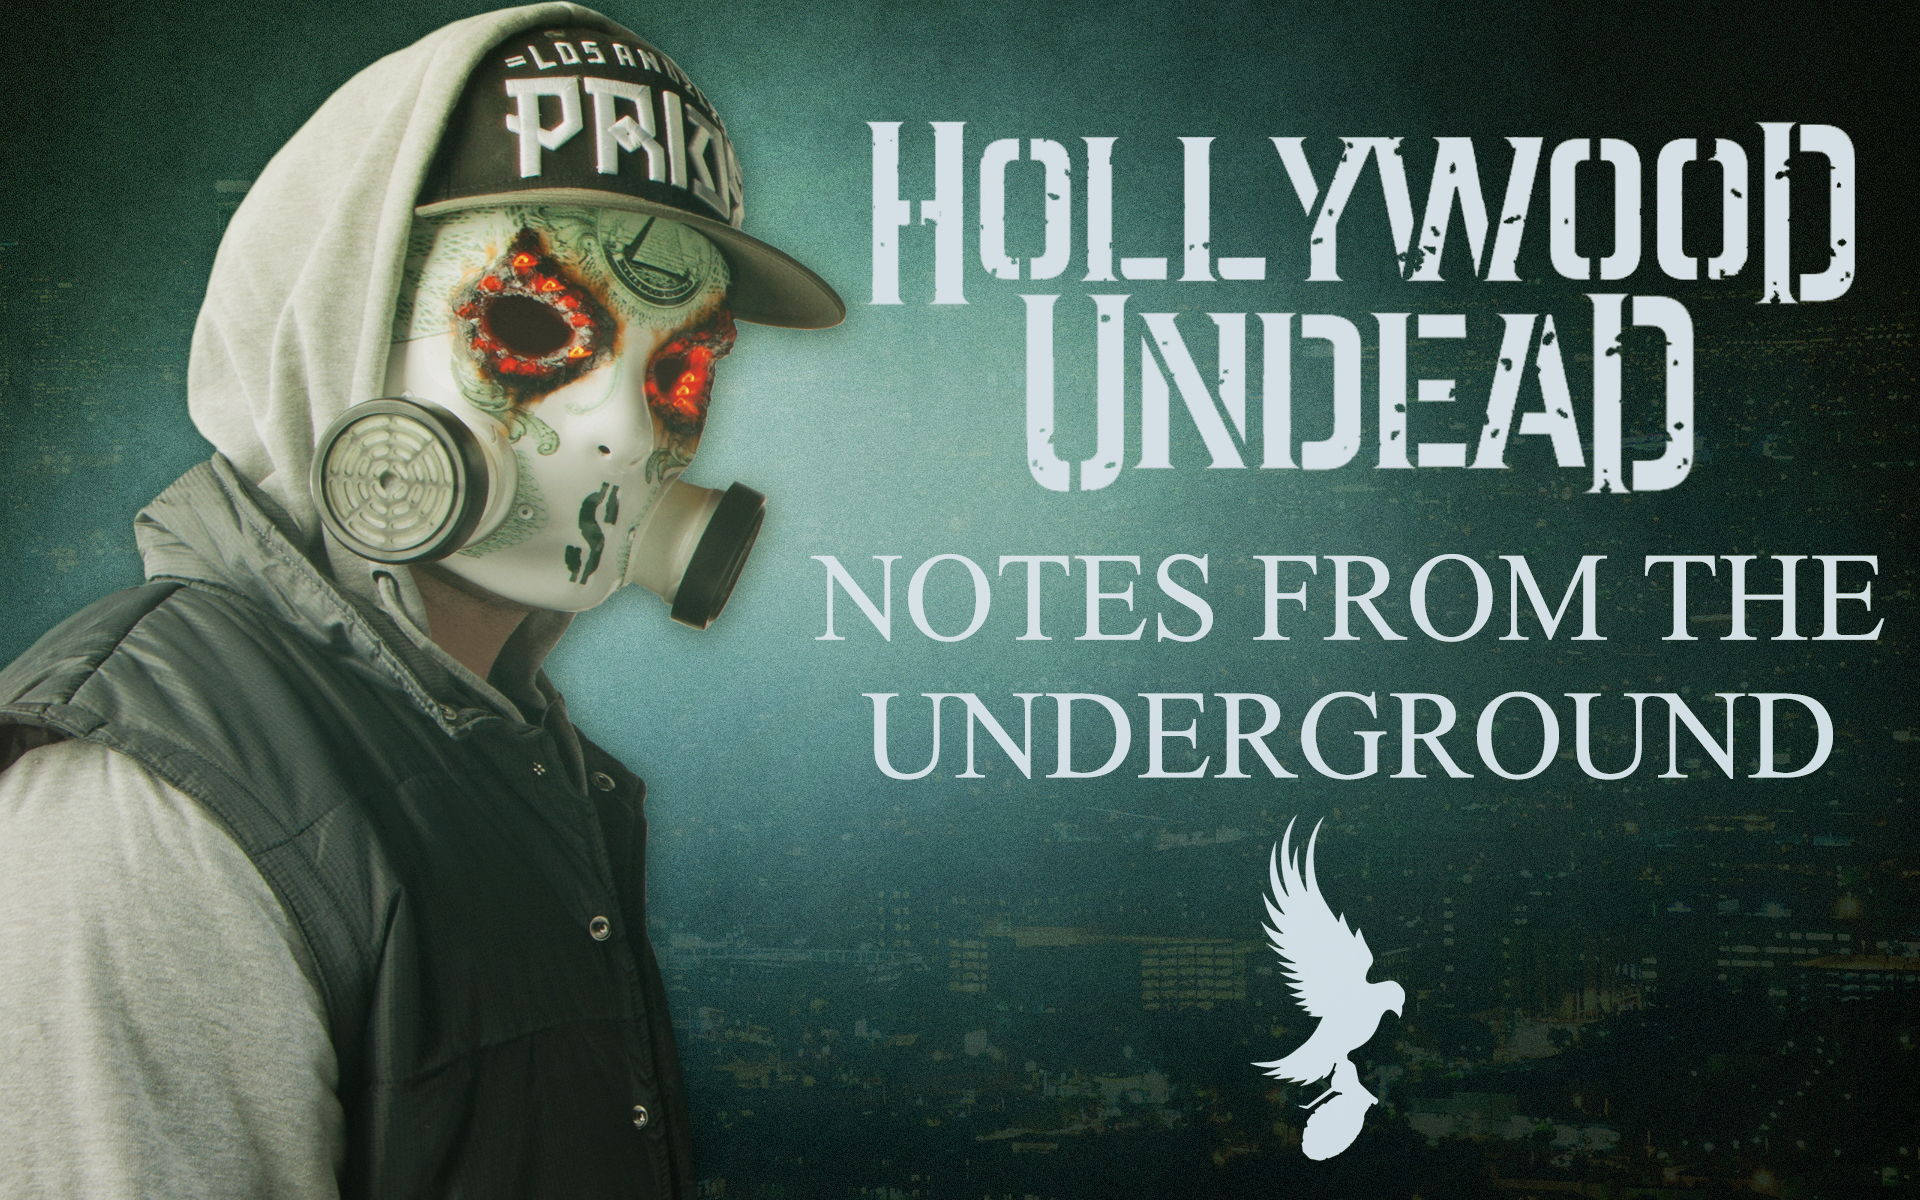 Hollywood undead j dog notes from the underground wallpapers photos